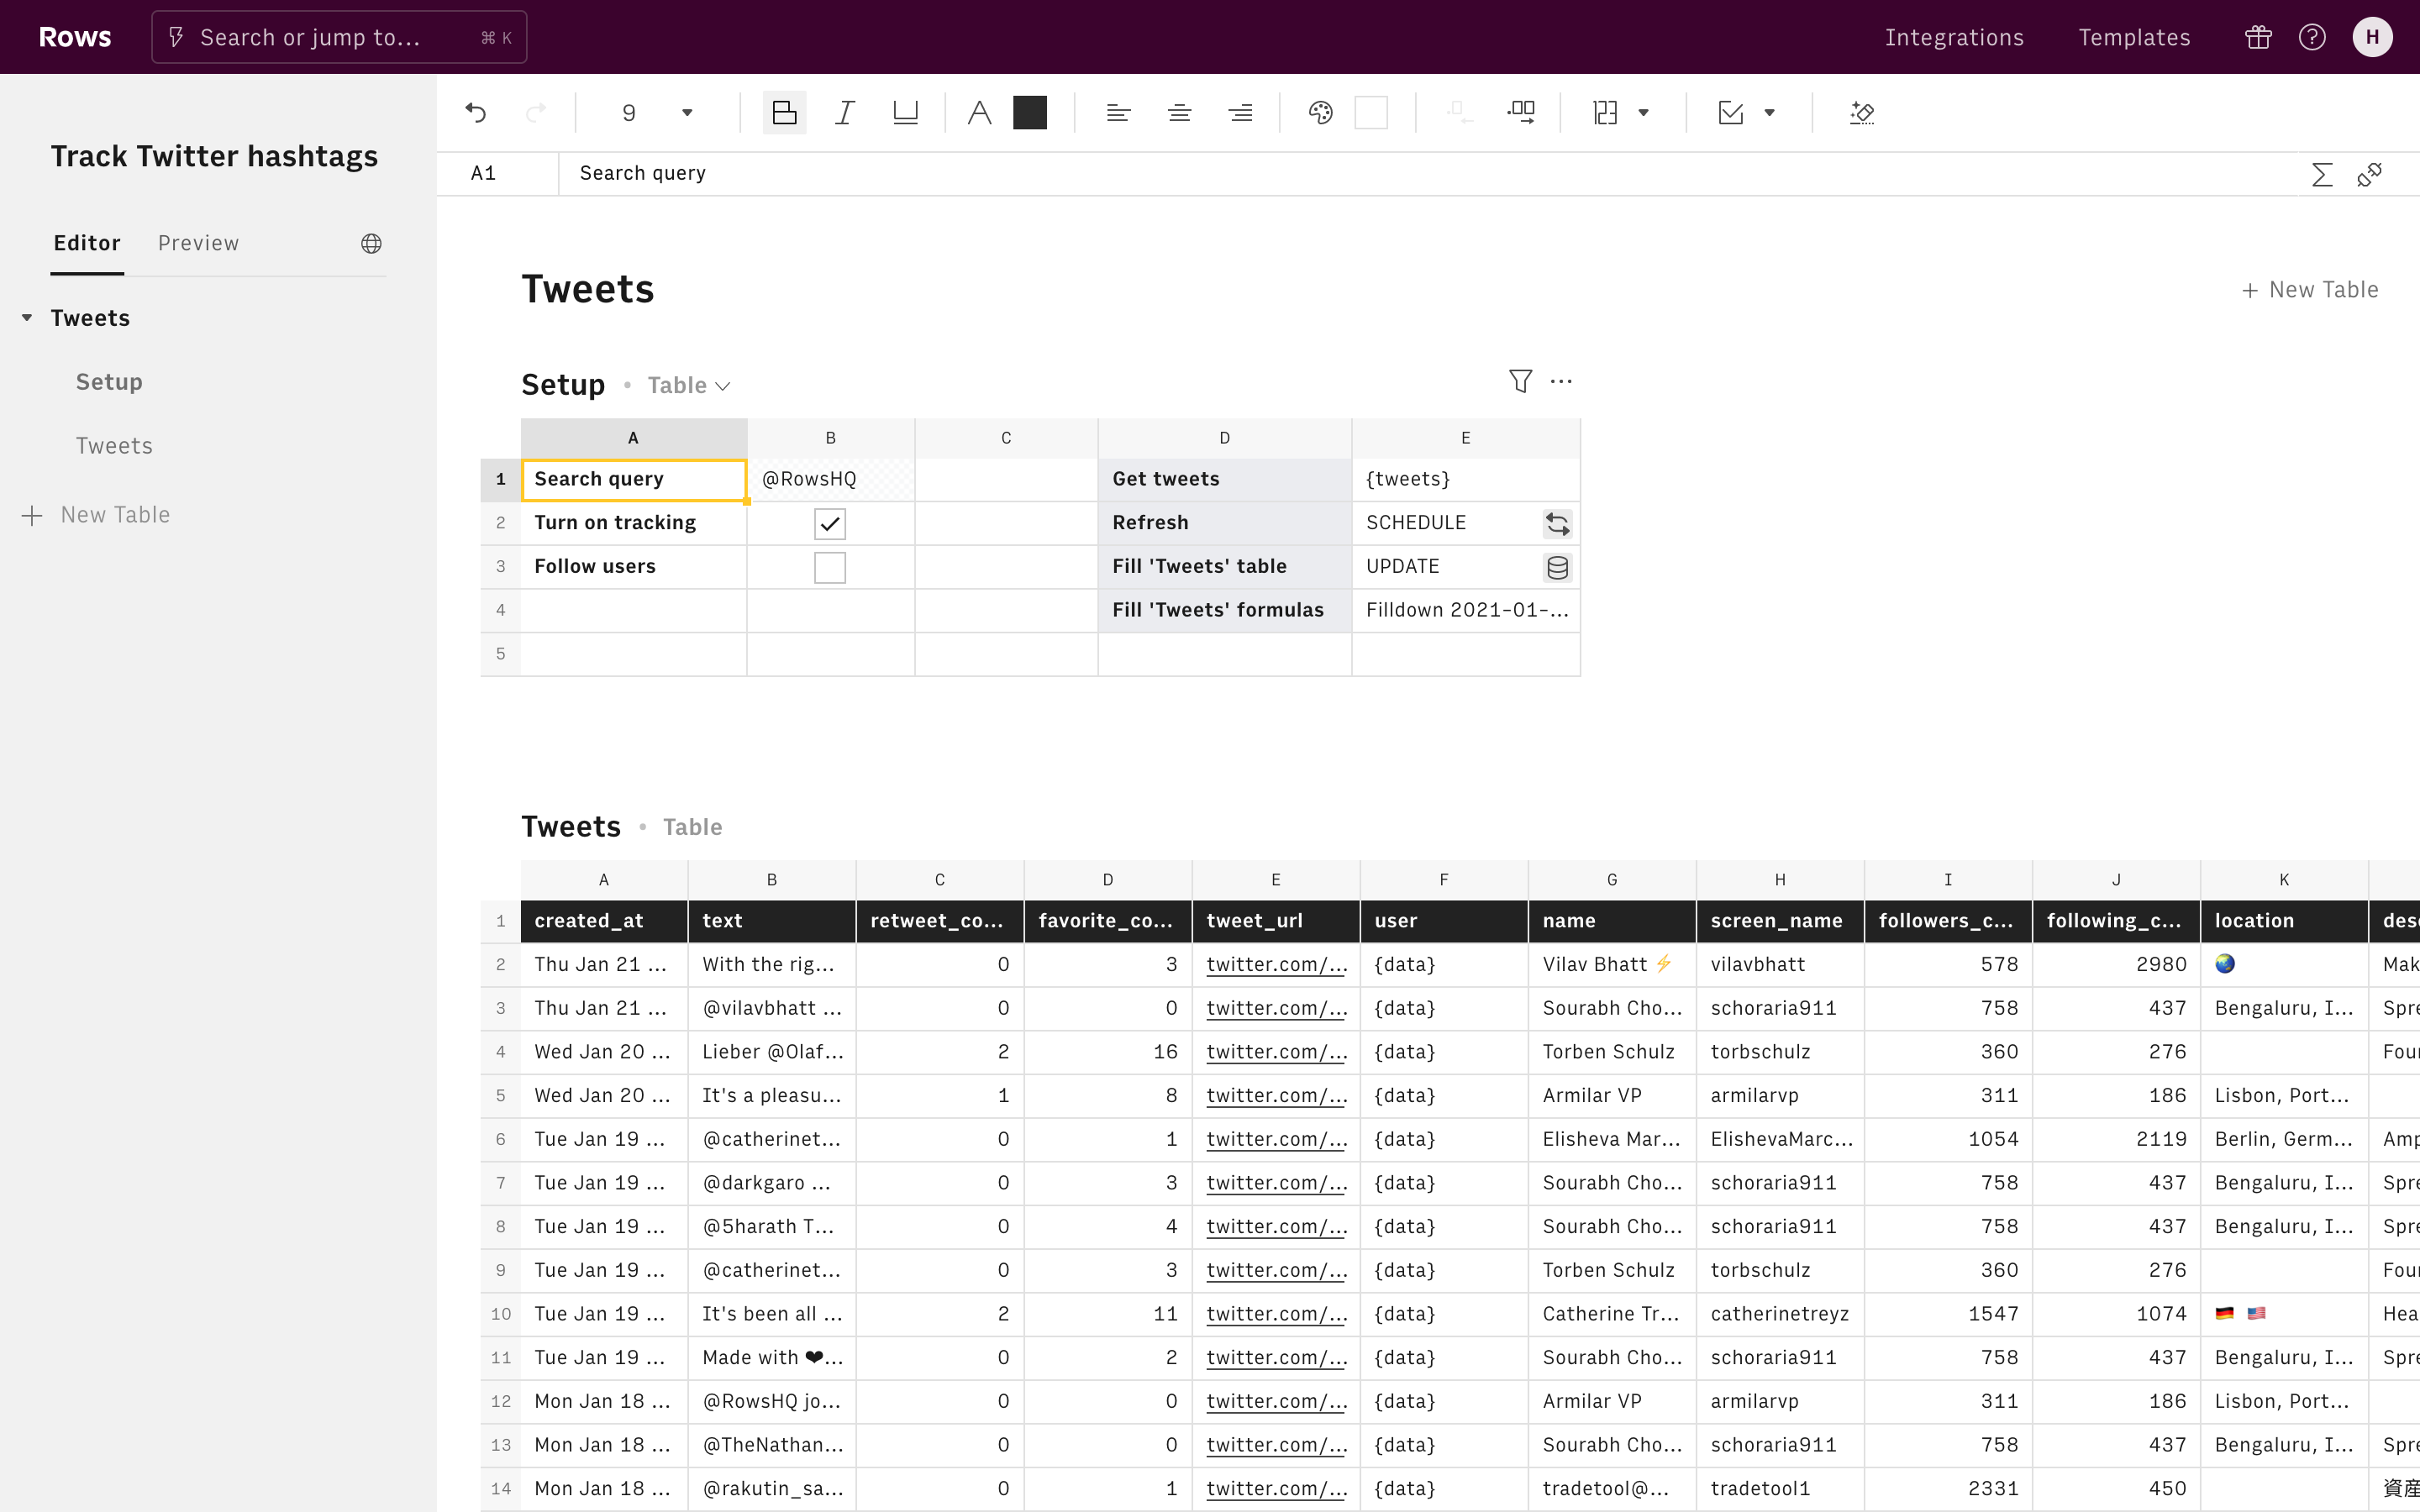 Track Twitter hashtags Editor